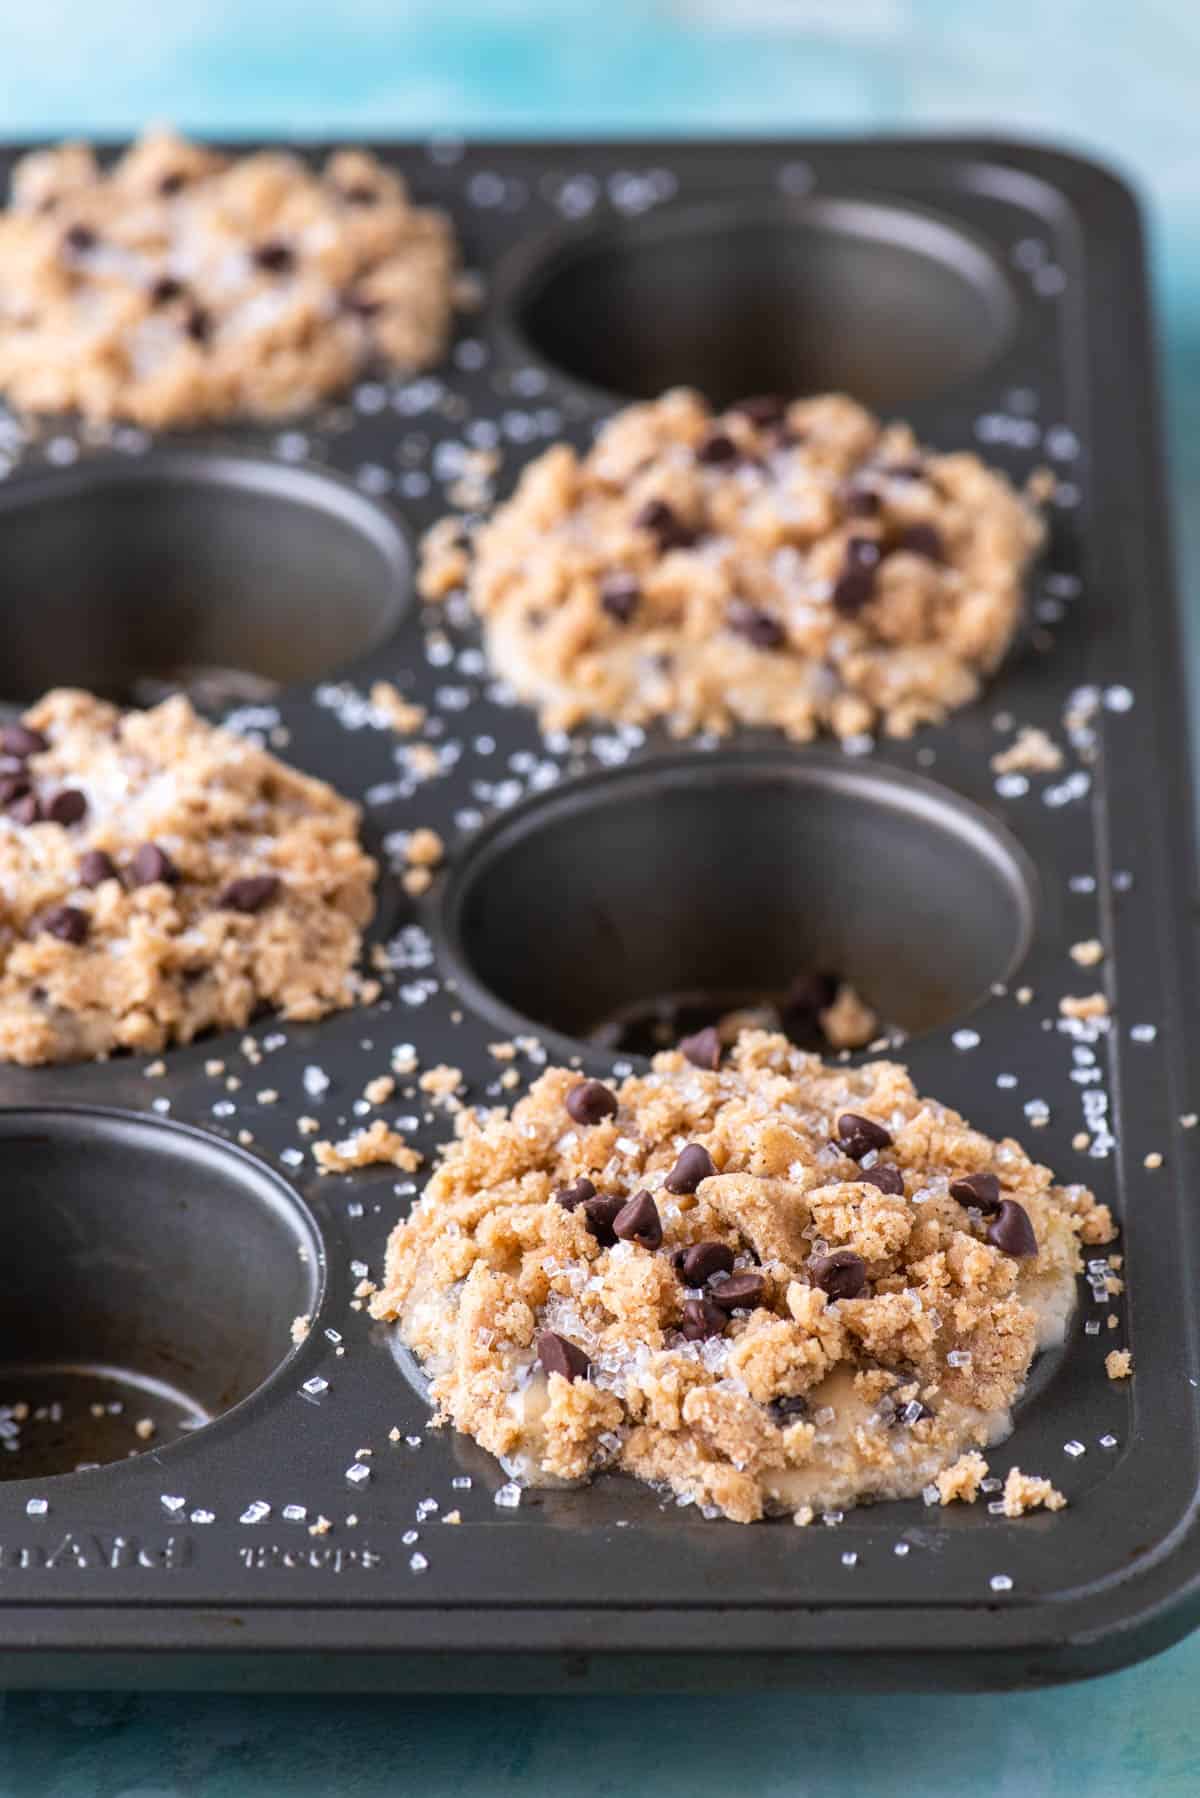 banana chocolate chip muffin batter filled in every other hole of a muffin pan